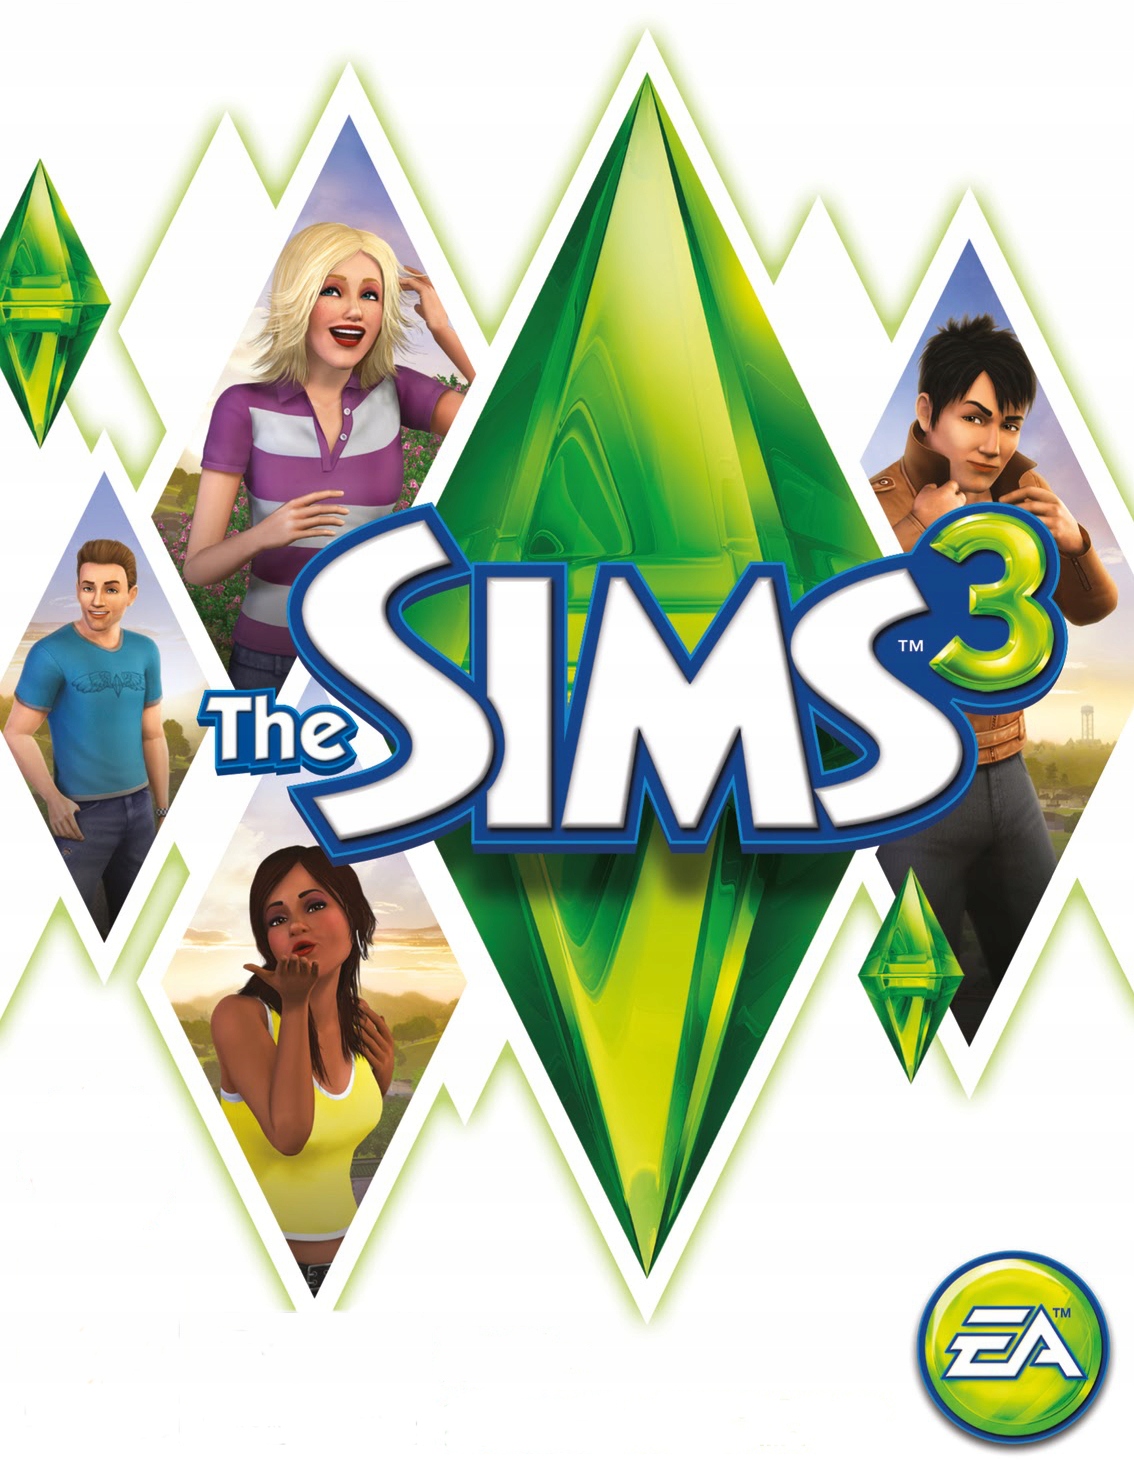 the sims 3 complete collection torrent pirate bay